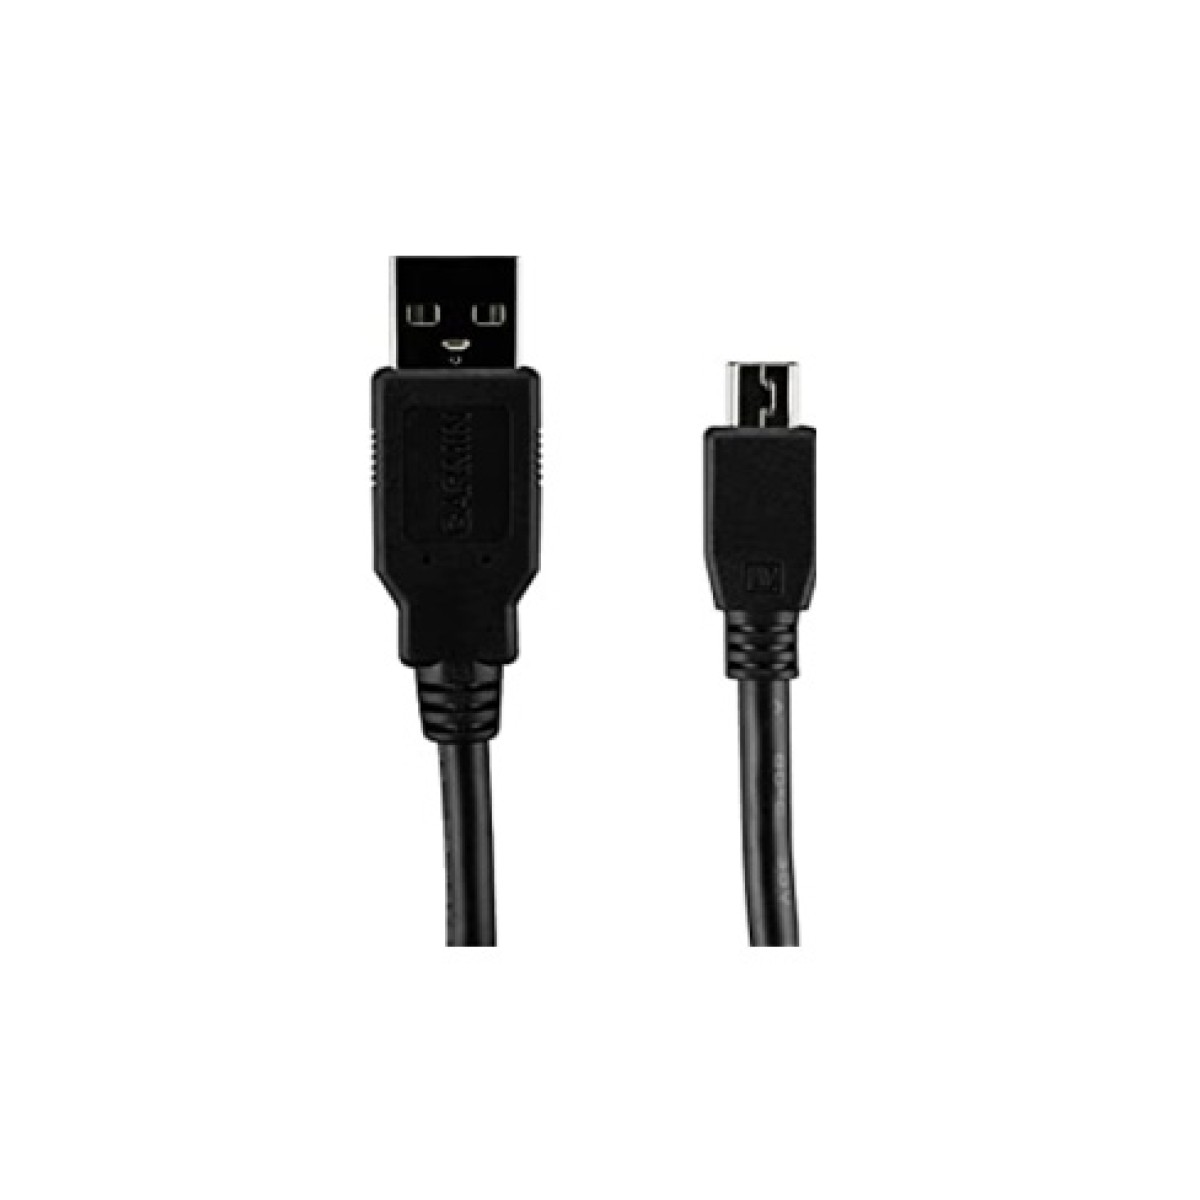 GARMIN USB Mass Storage PC interface cable, replacement 